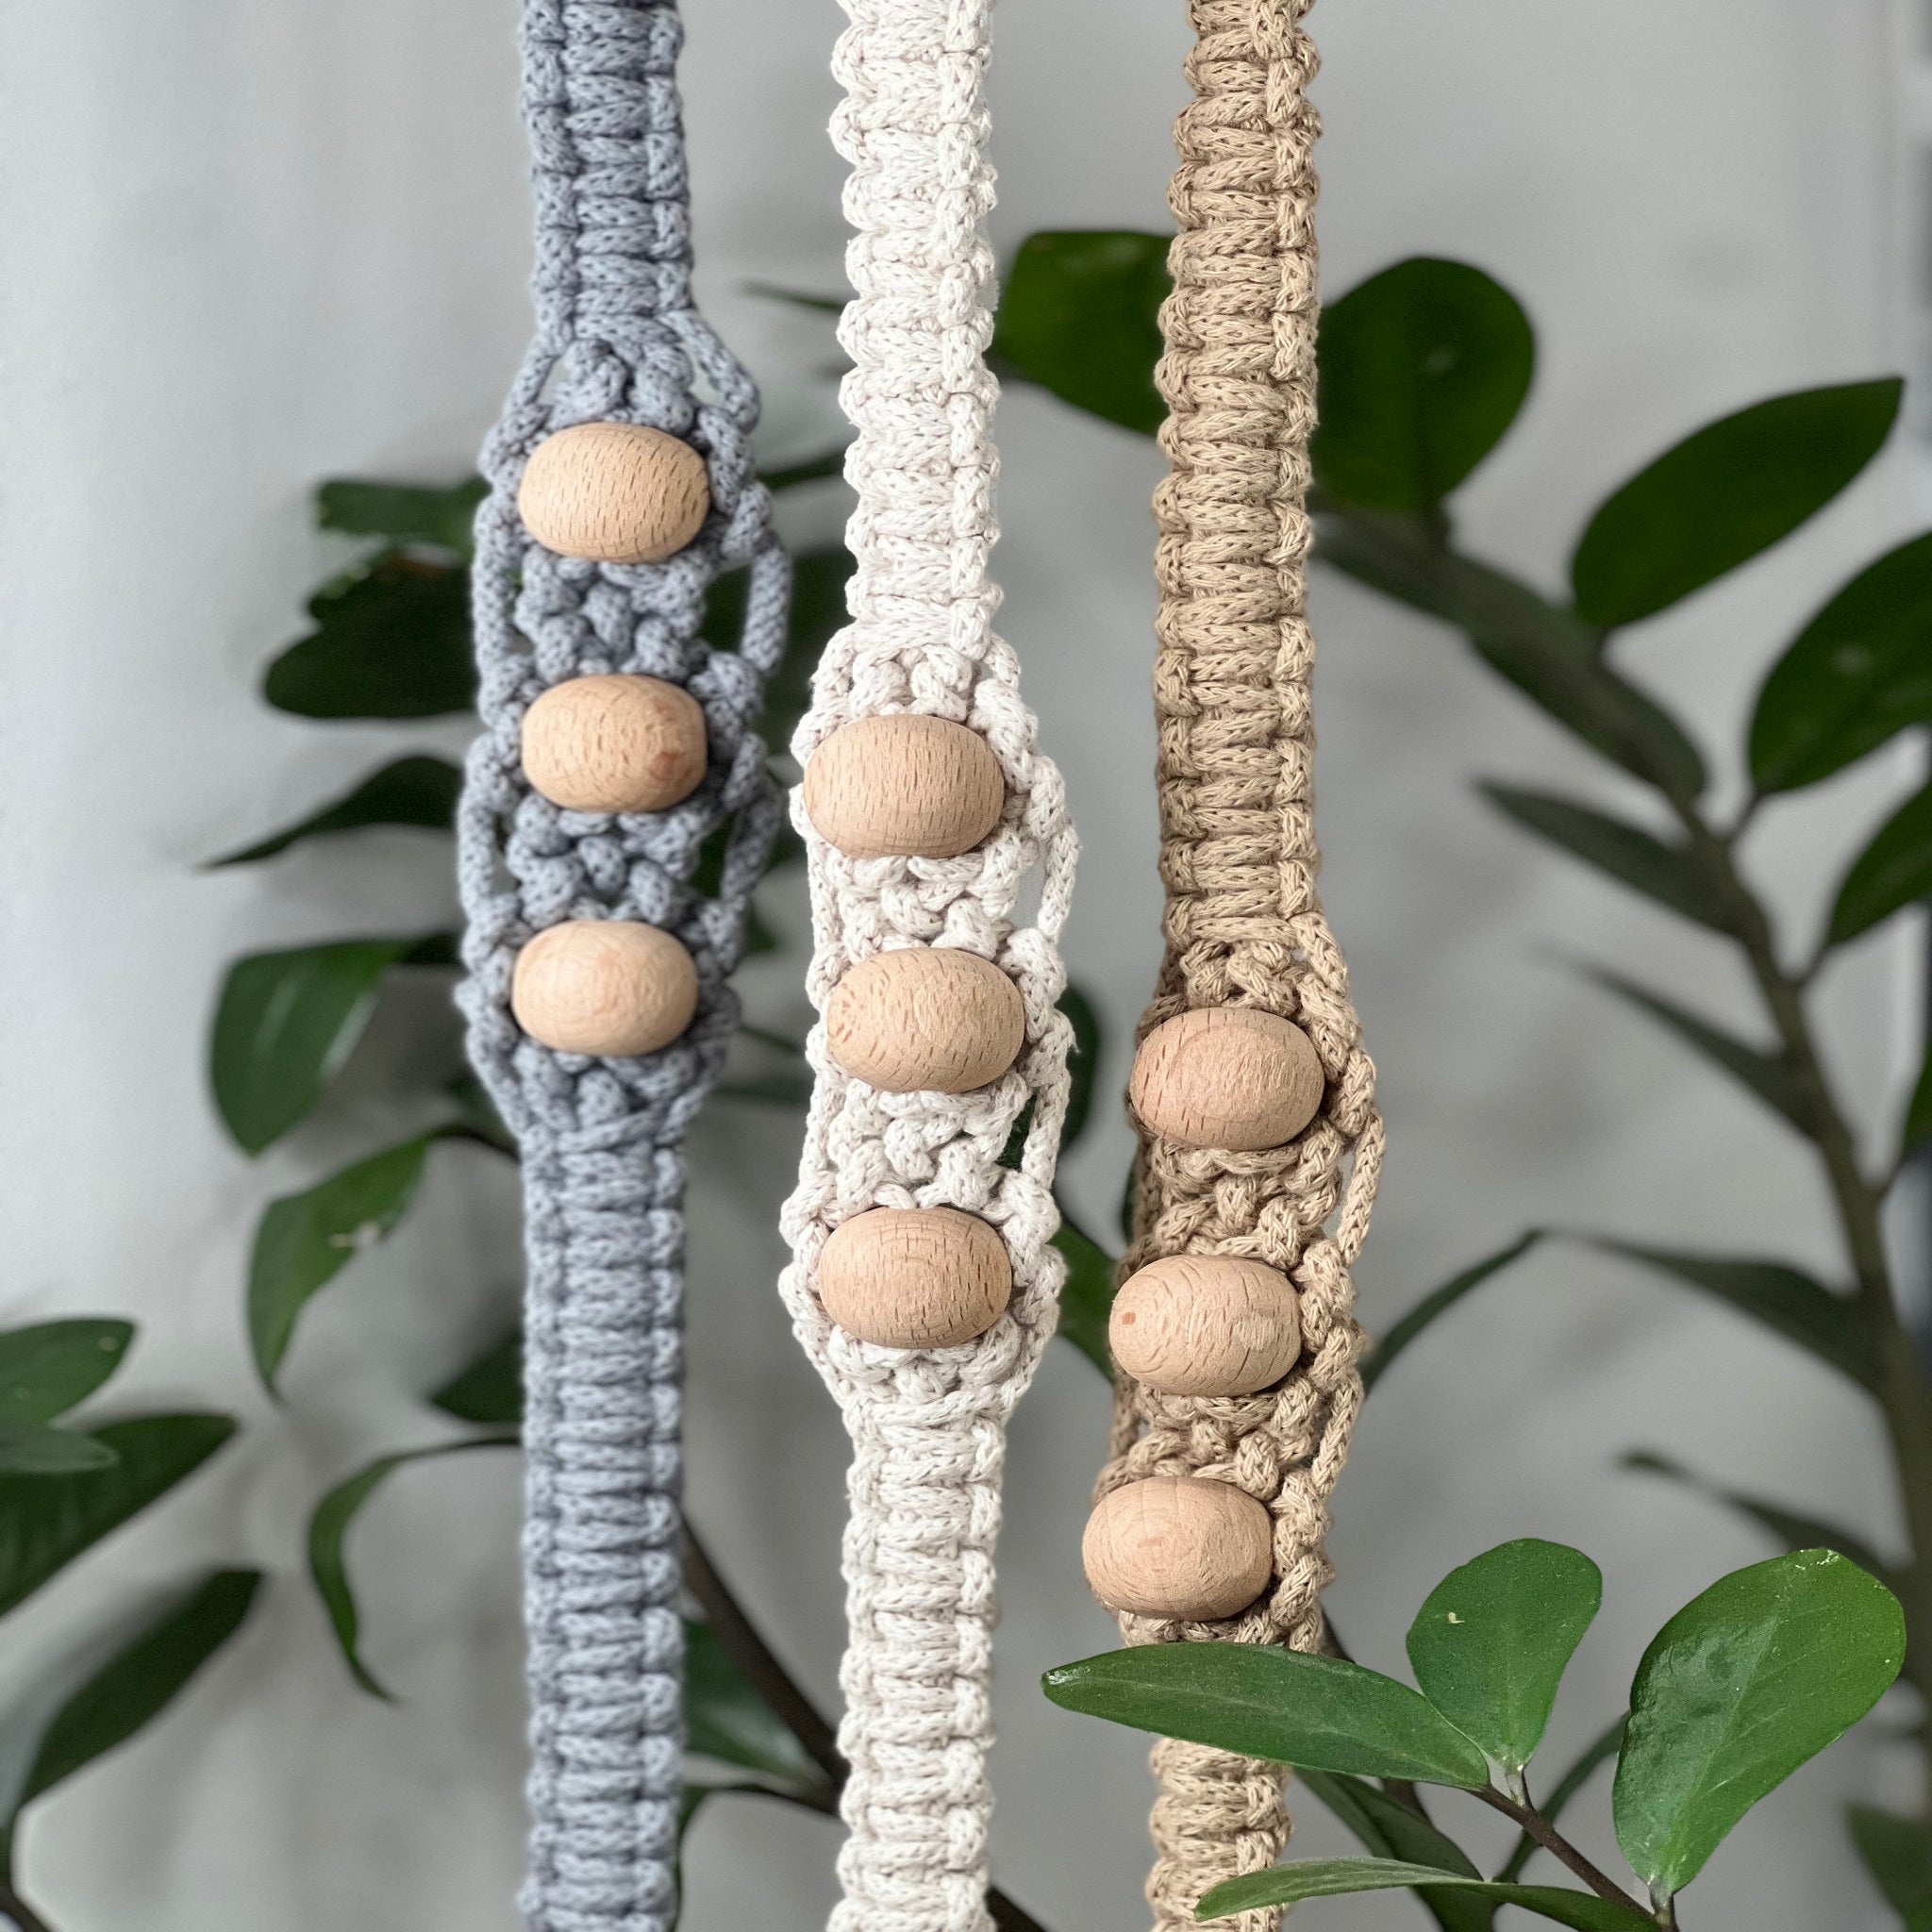 DVAAR YOGA MAT CARRIER STRAPS MACRAME YOGA MAT HOLDERS 100% COTTON WASHABLE ,TRENDY GIFT, HANDMADE AND ECO FRIENDLY AVAILABLE IN BEAUTIFUL LIGHT SHADES -WONDERFUL WHITE.